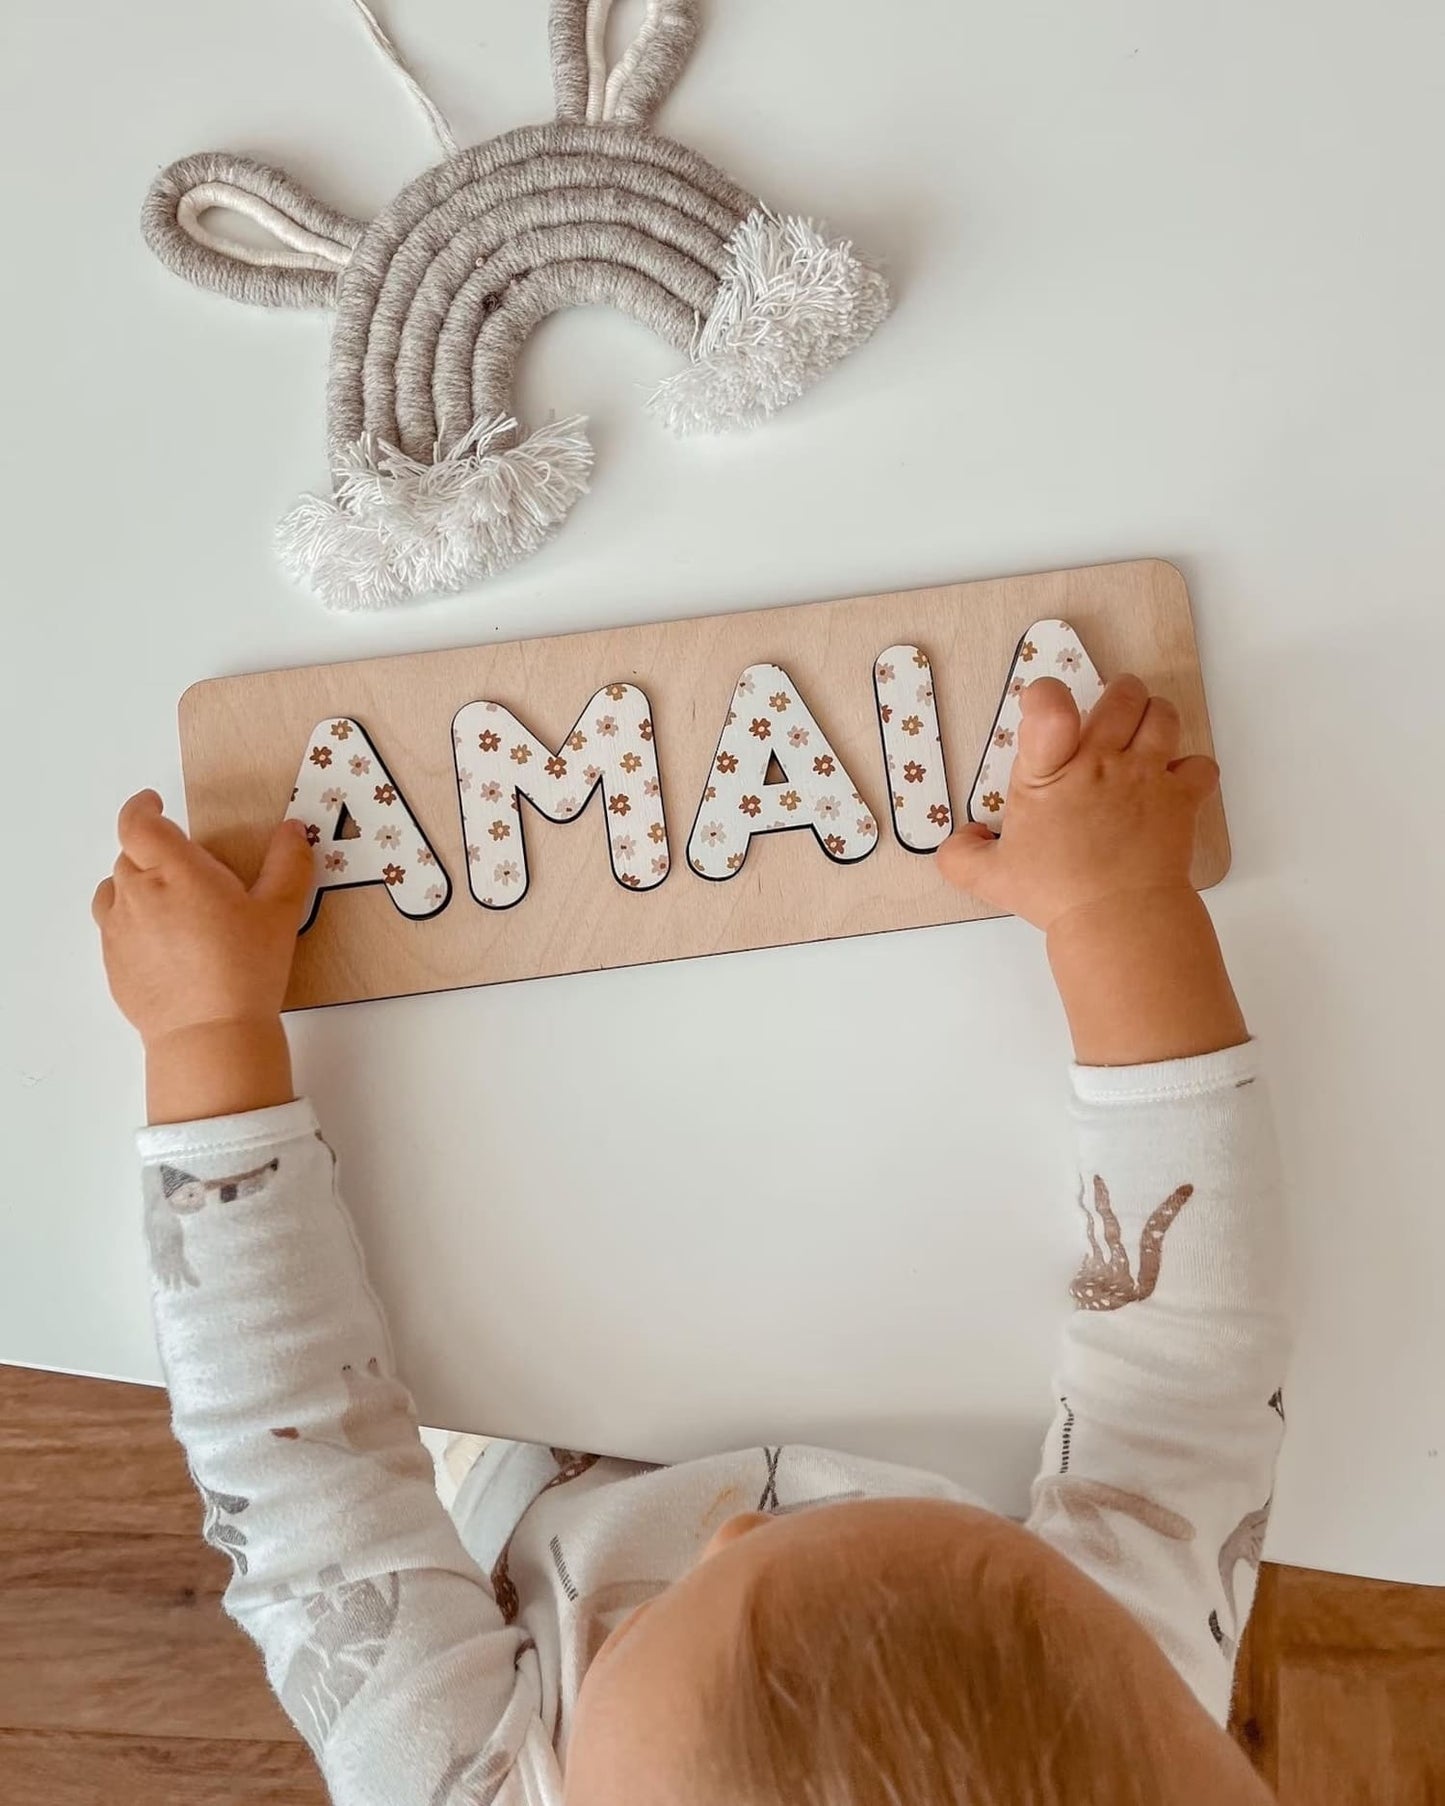 1st Birthday Gift for Kids - Baby Name Puzzle